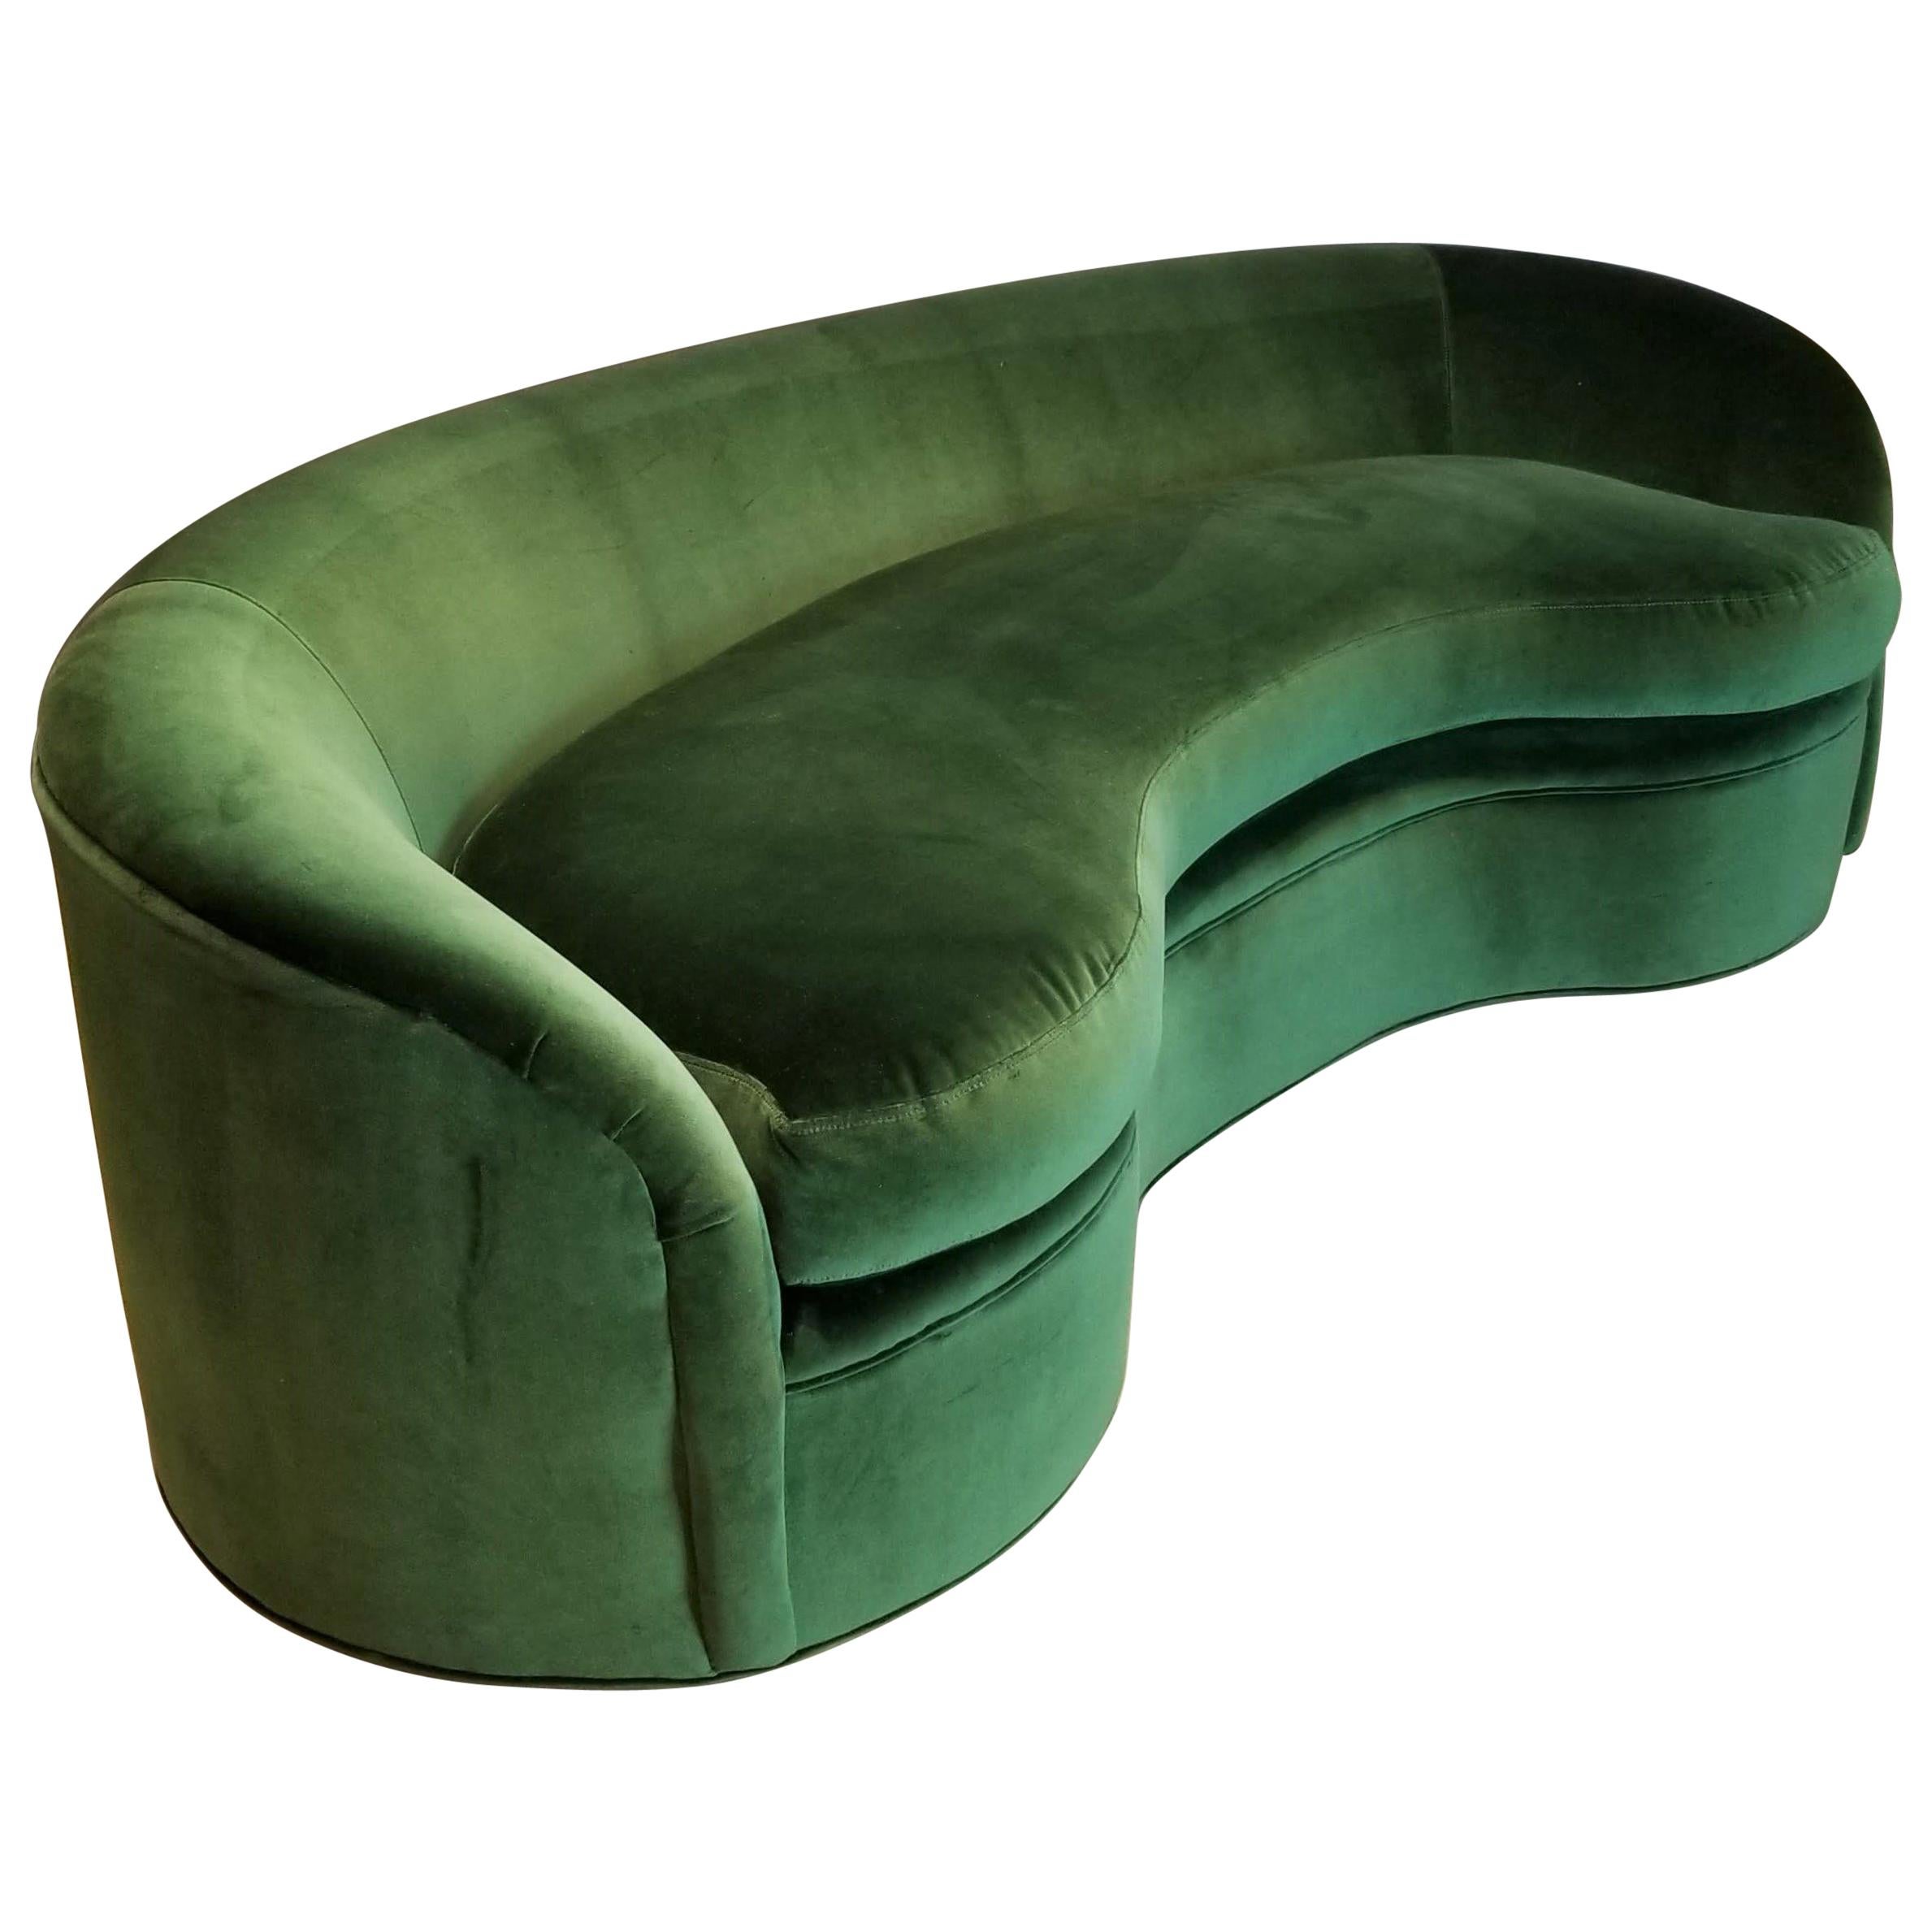 Biomorphic Kidney Form Sofa by Directional Furniture in Emerald Green Velvet